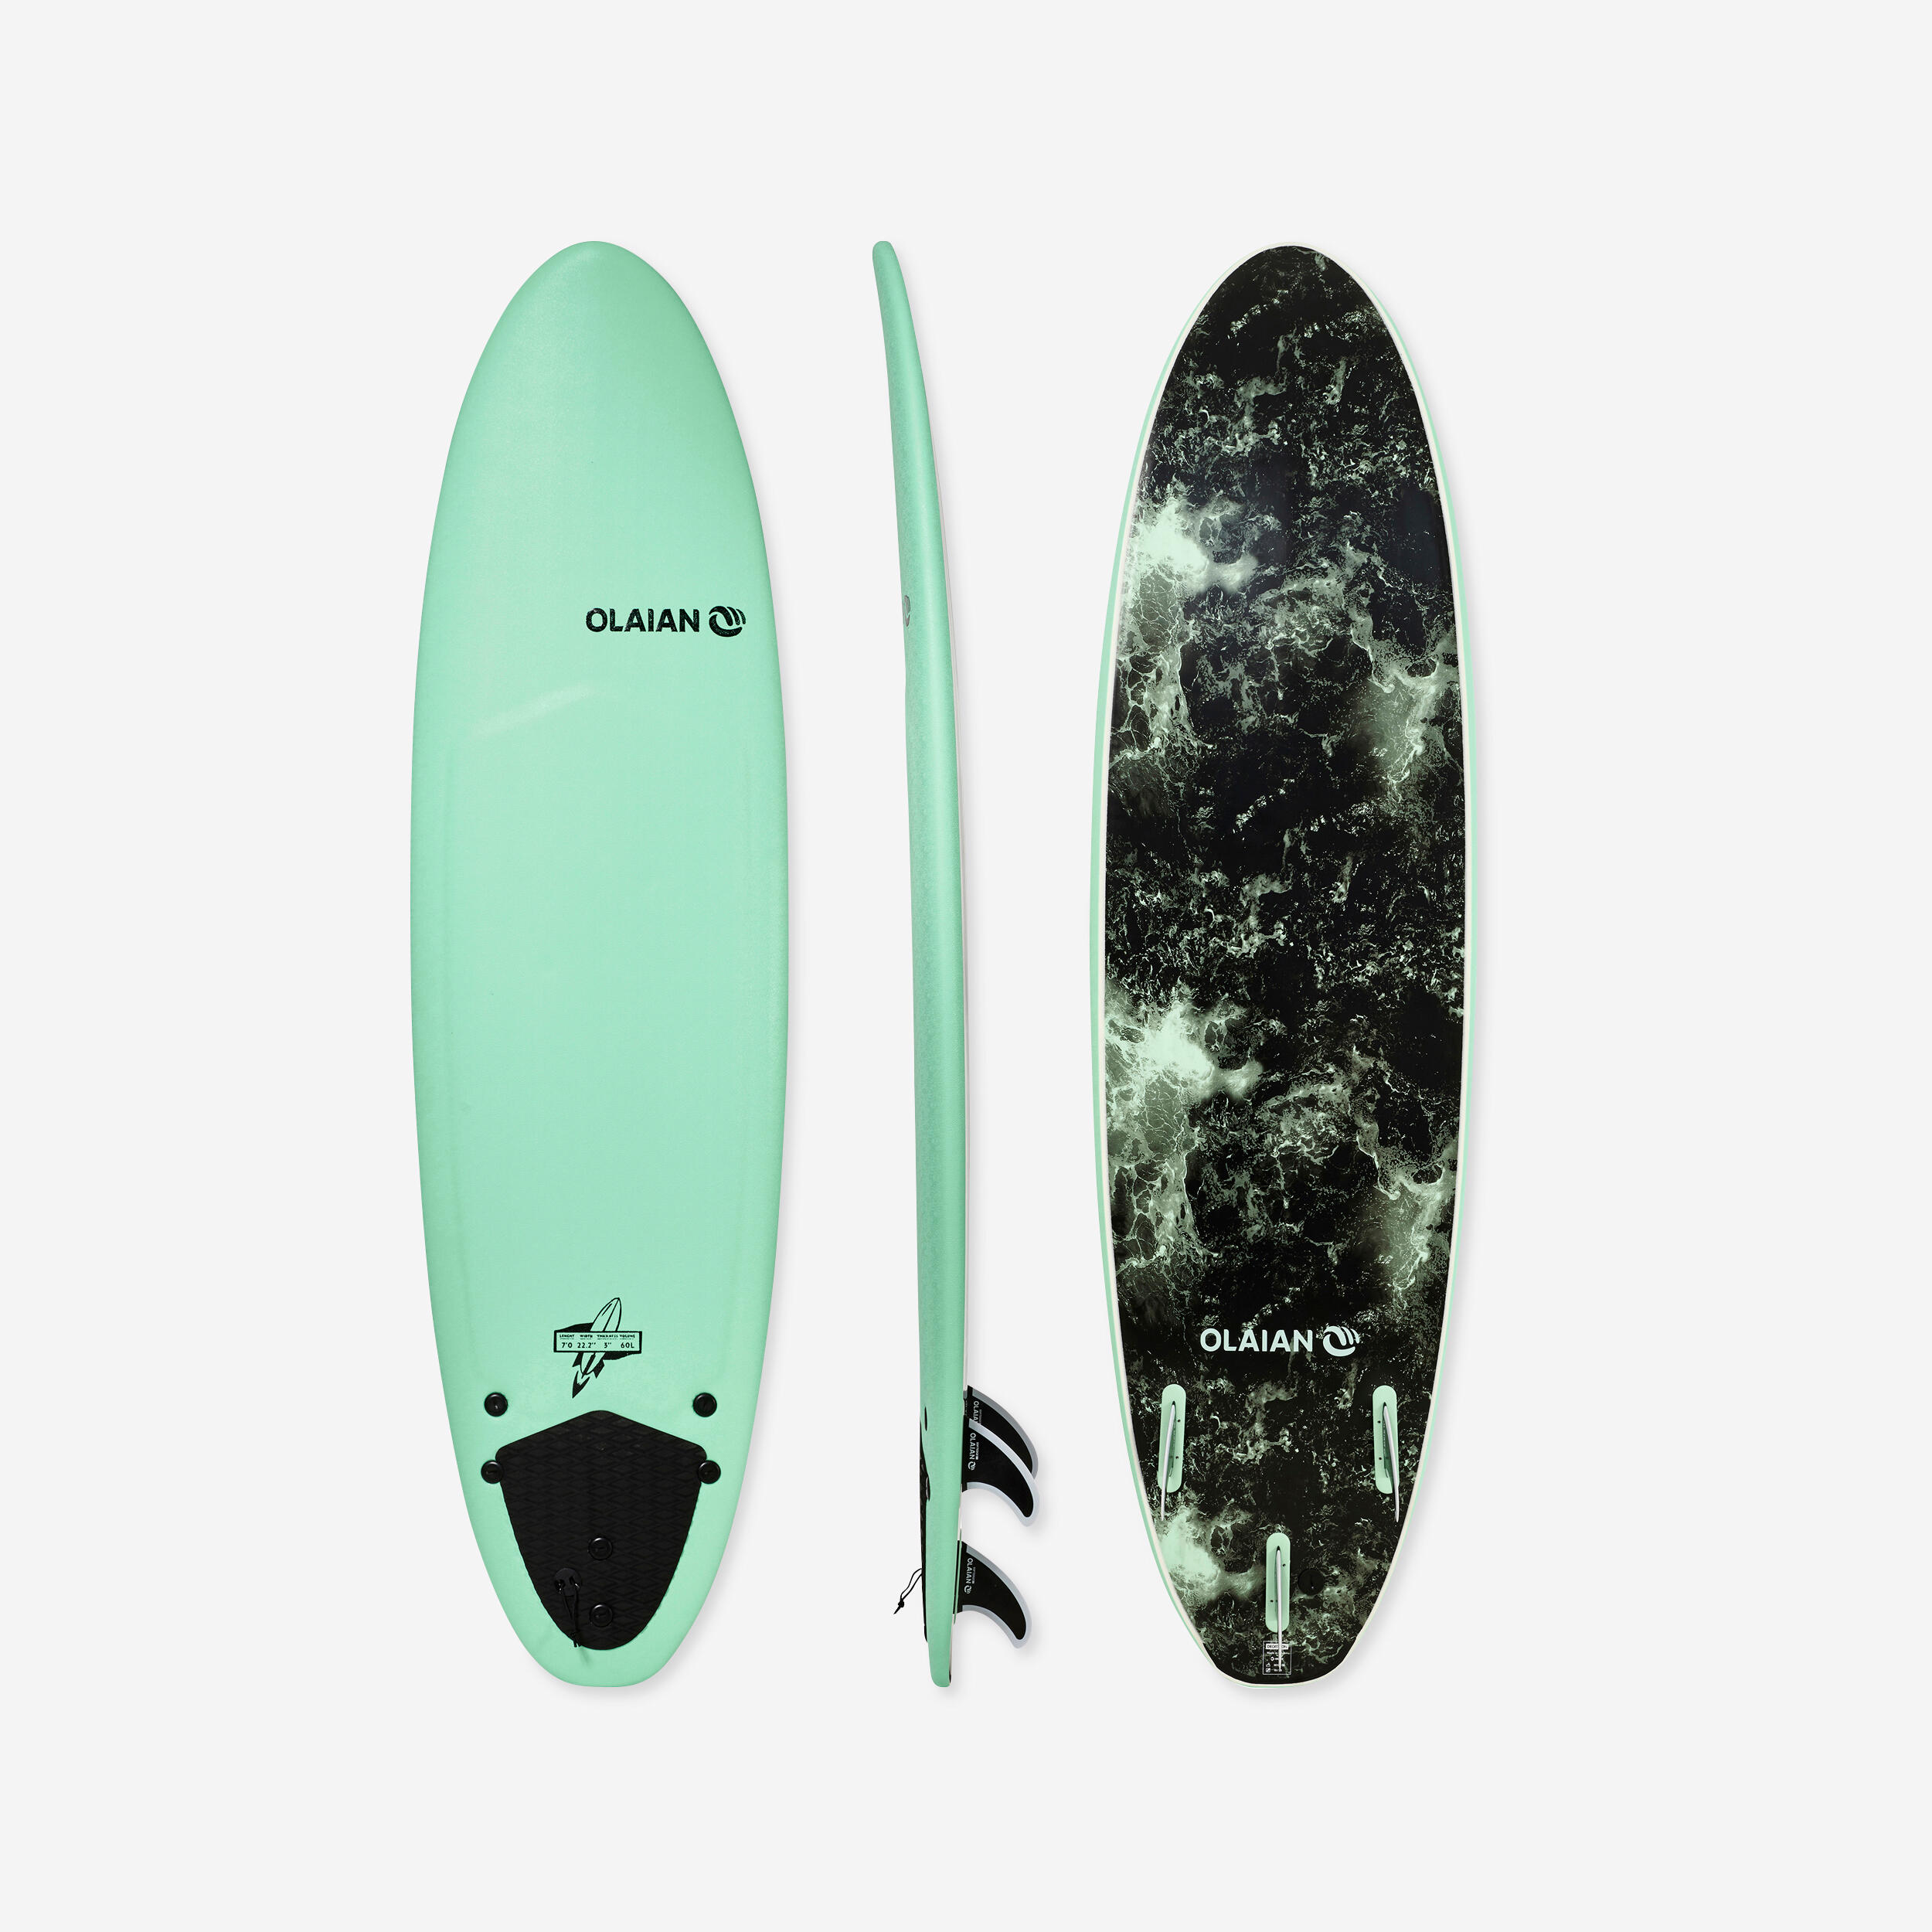 FOAM SURFBOARD 900 7’  . Comes with 3 fins. 1/12